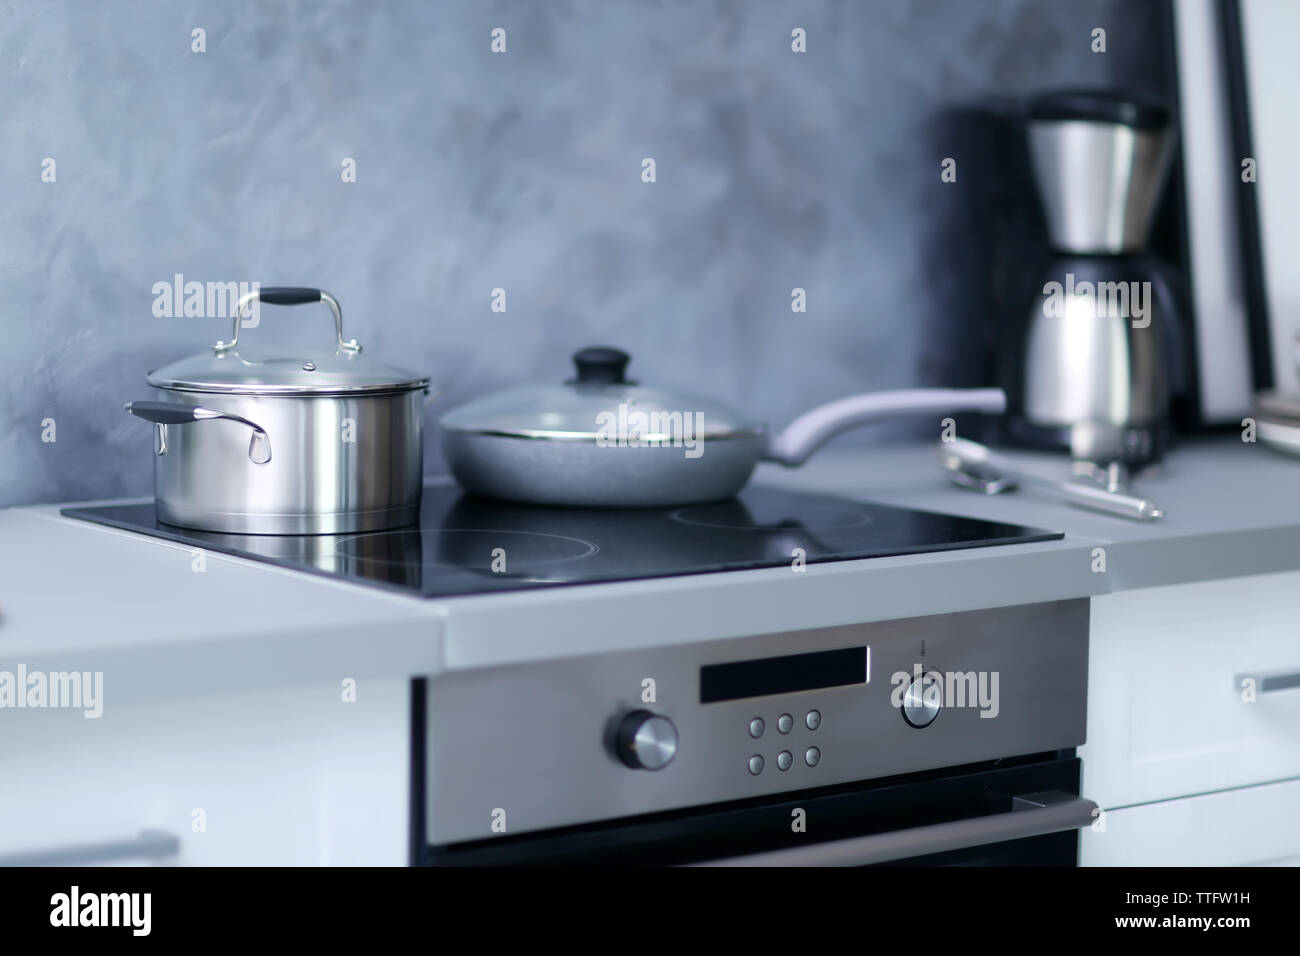 Modern Electric Stove With Induction Cooktop In The Kitchen Stock Photo,  Picture and Royalty Free Image. Image 81263807.